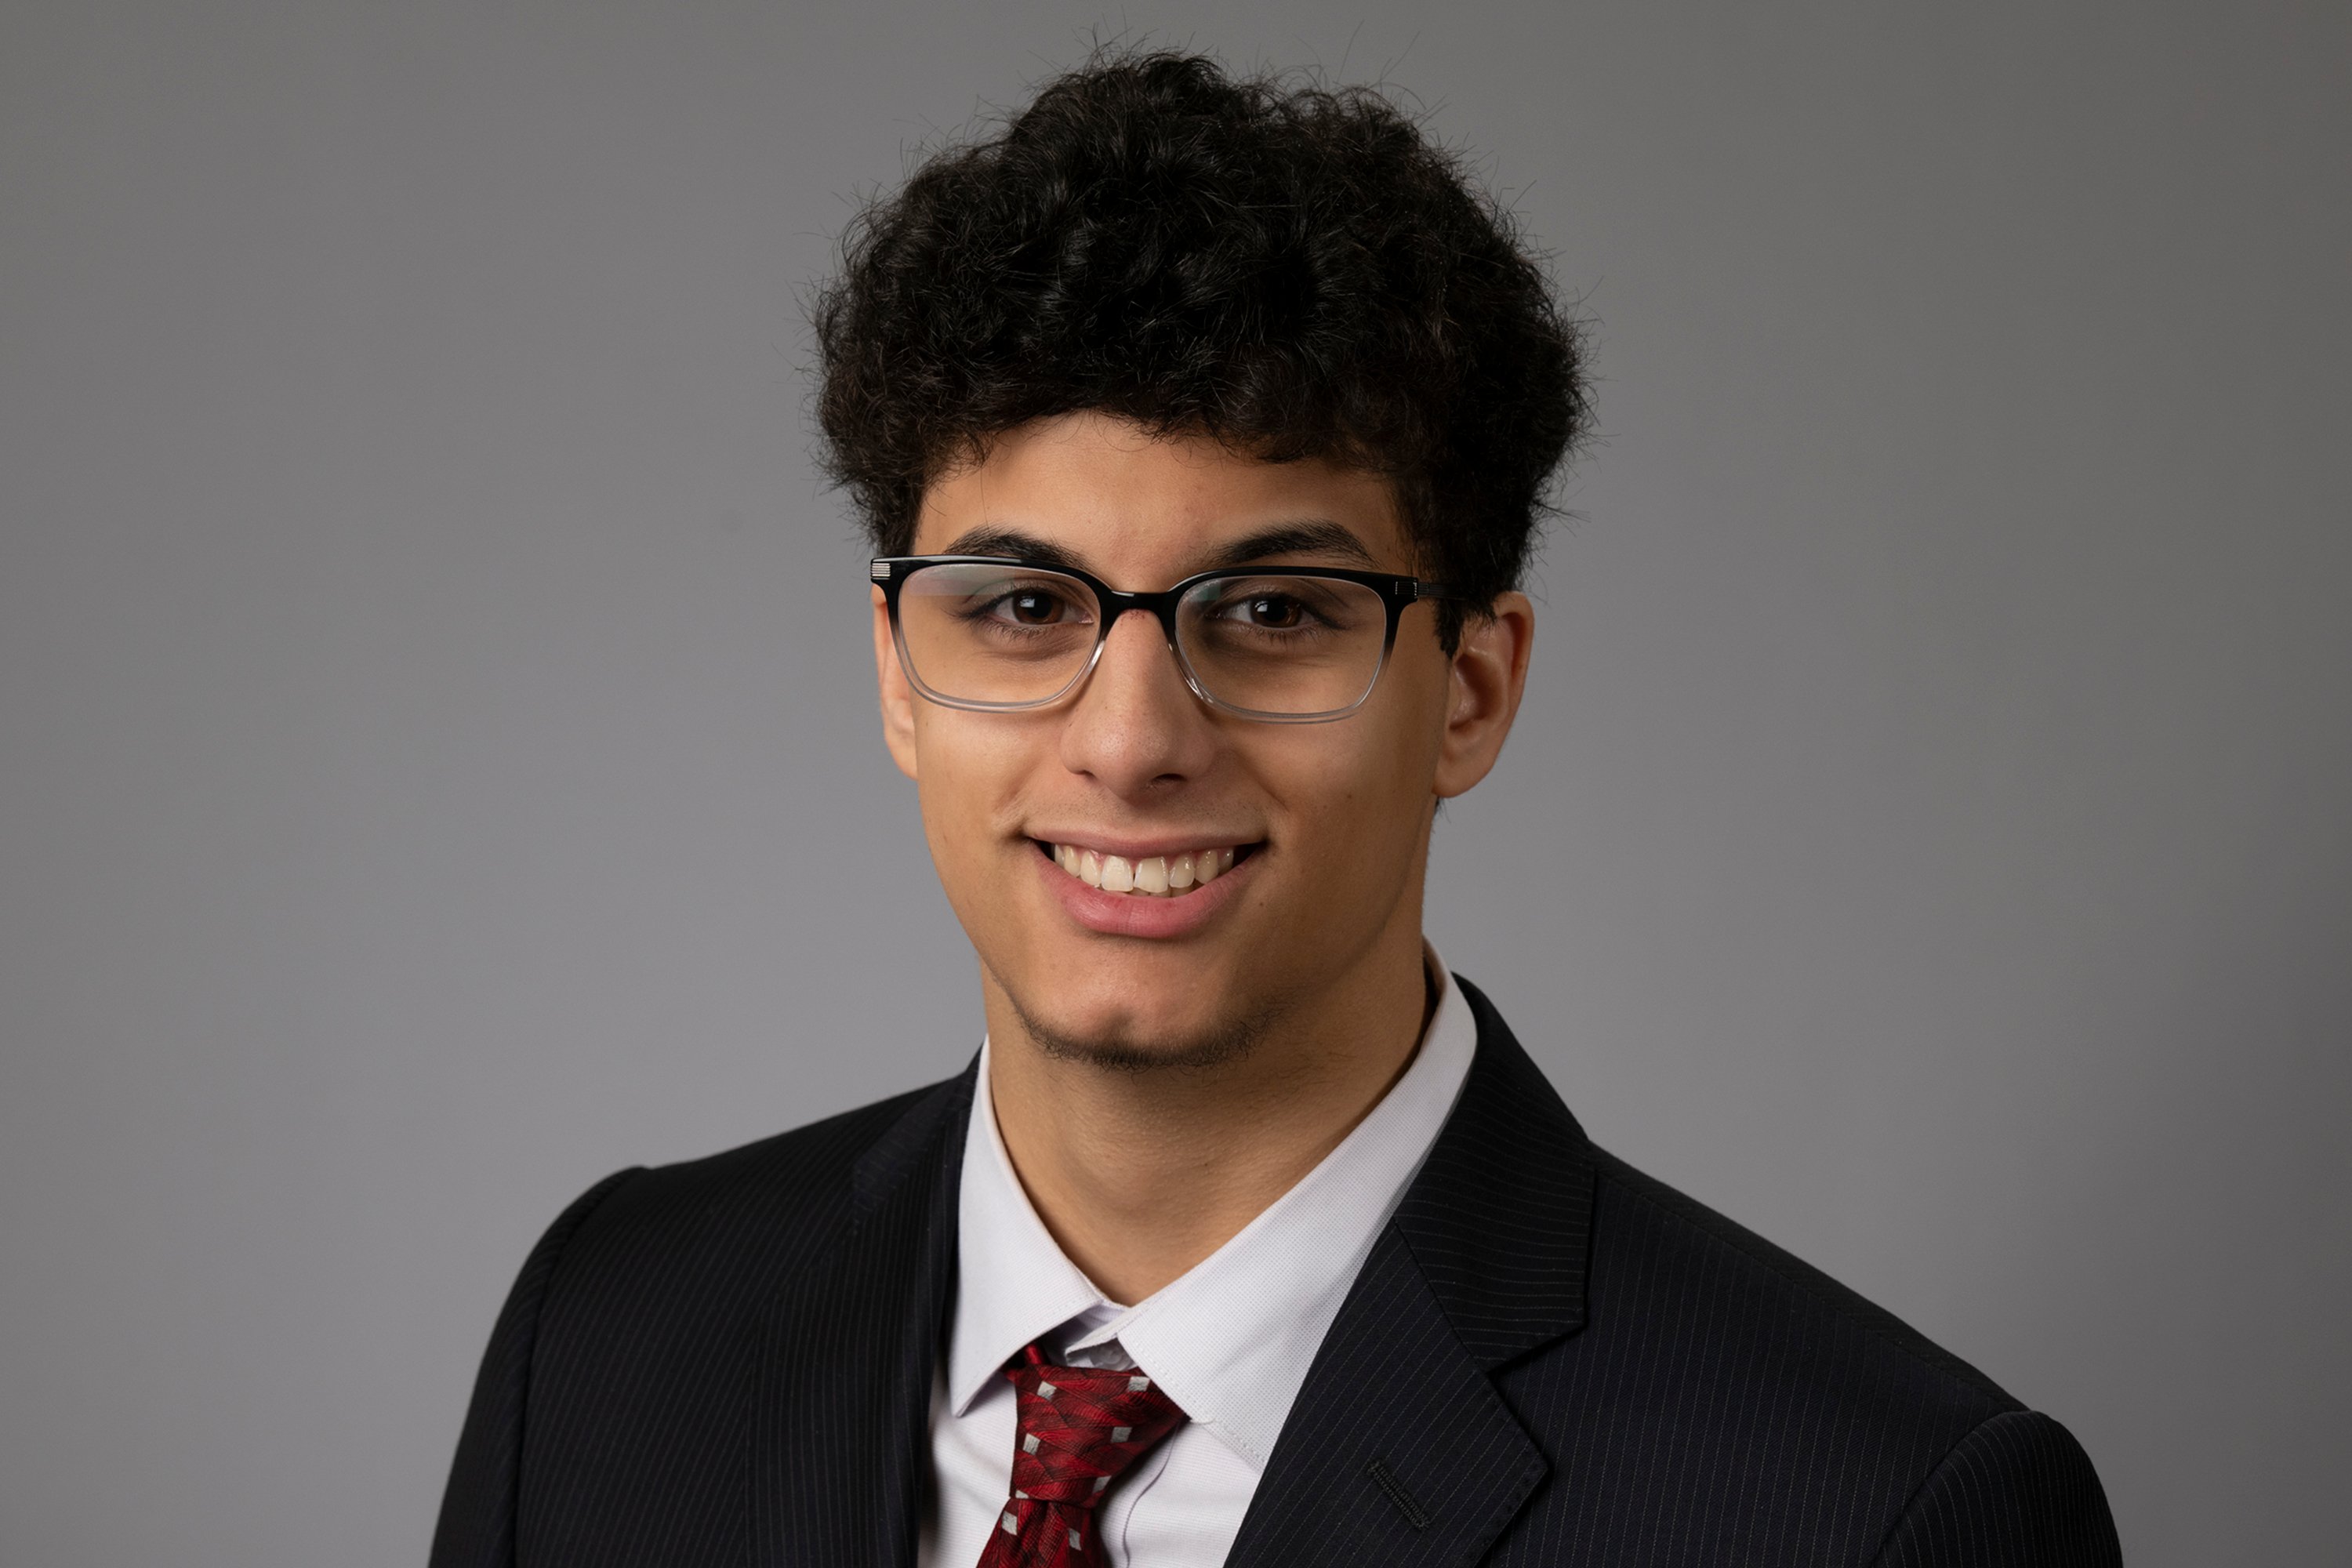 Sami Saeed Elected as Next Student Member of the Board